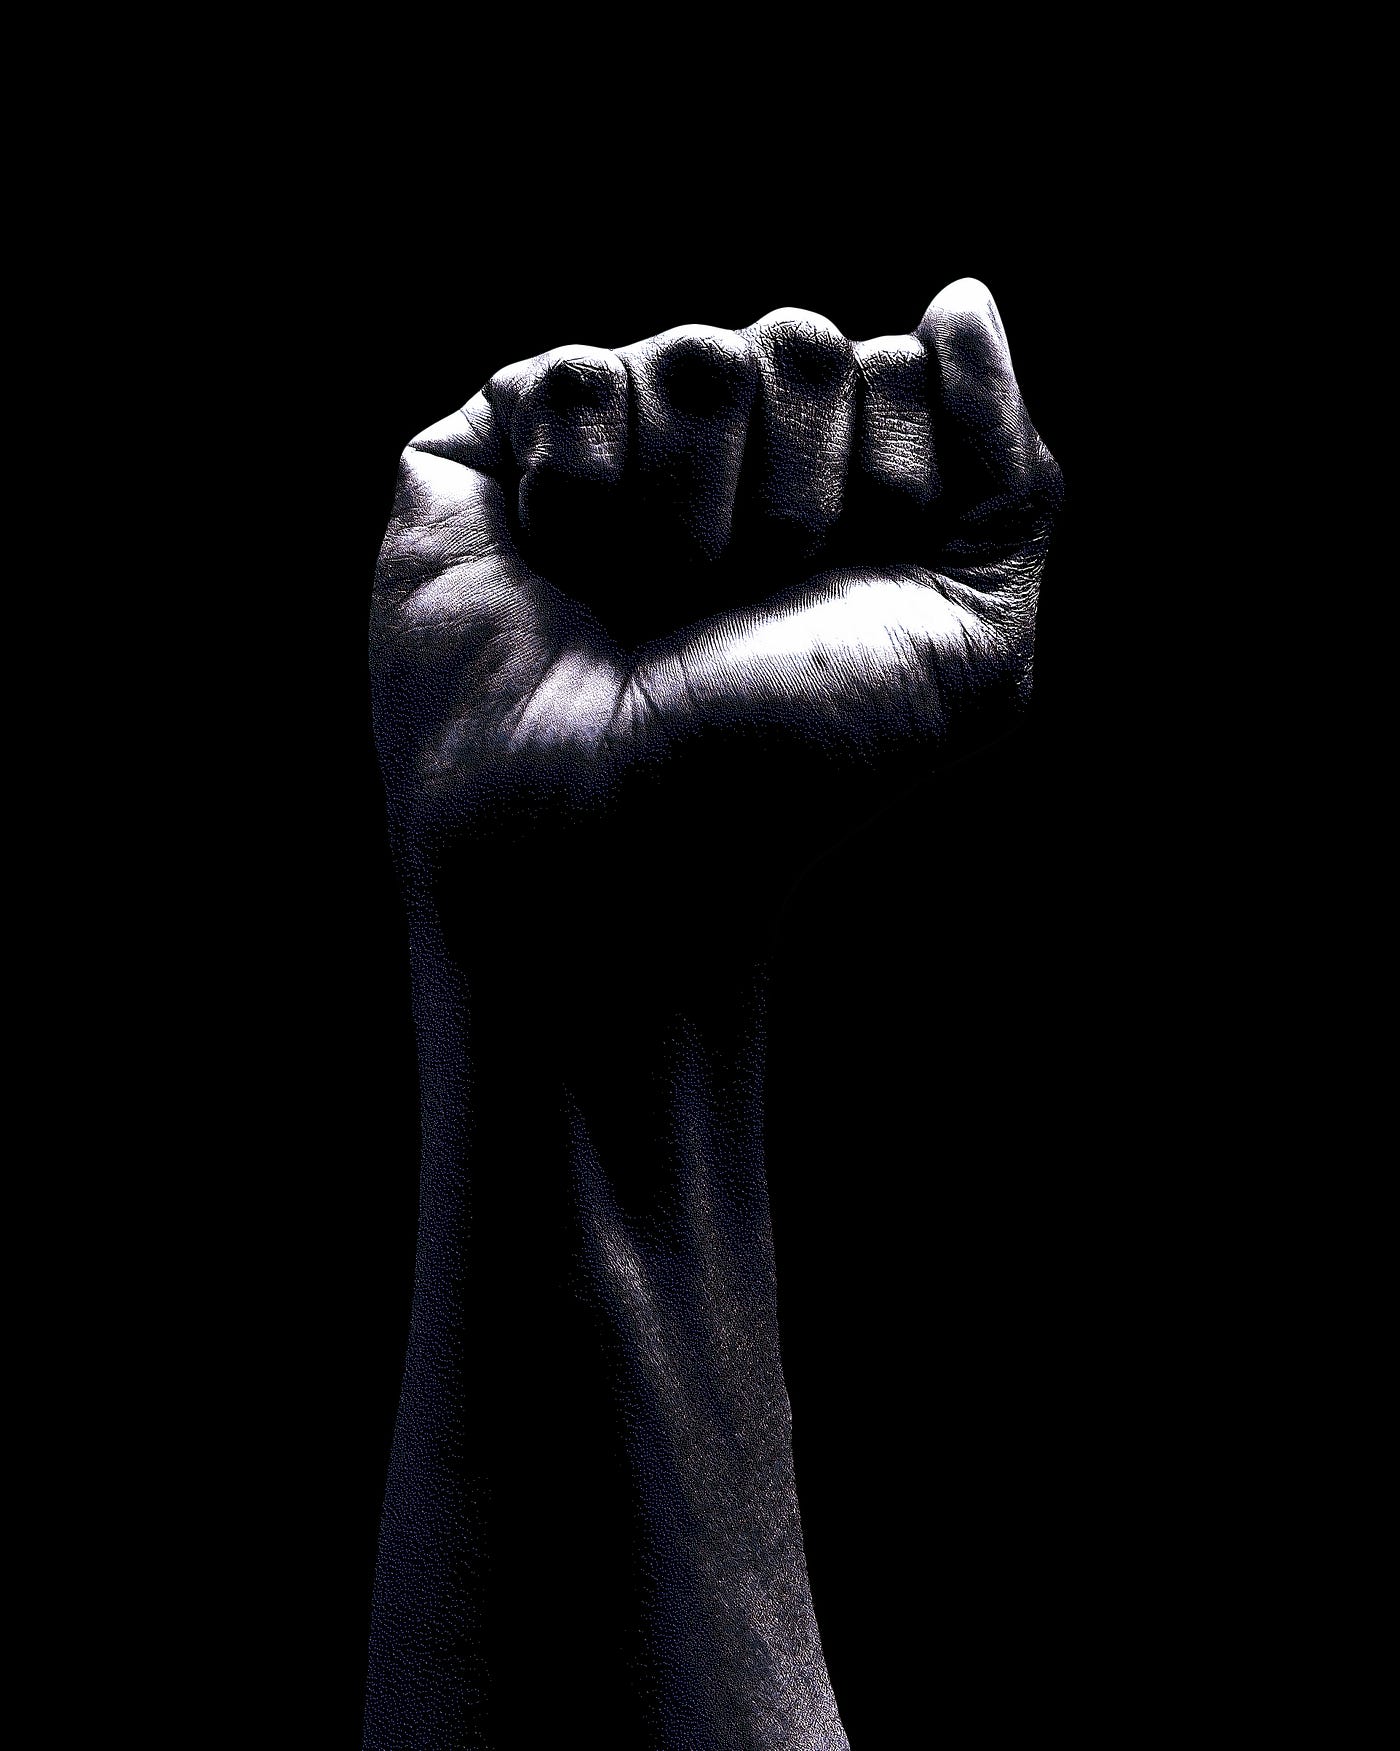 A person thrusts their fist into the air.